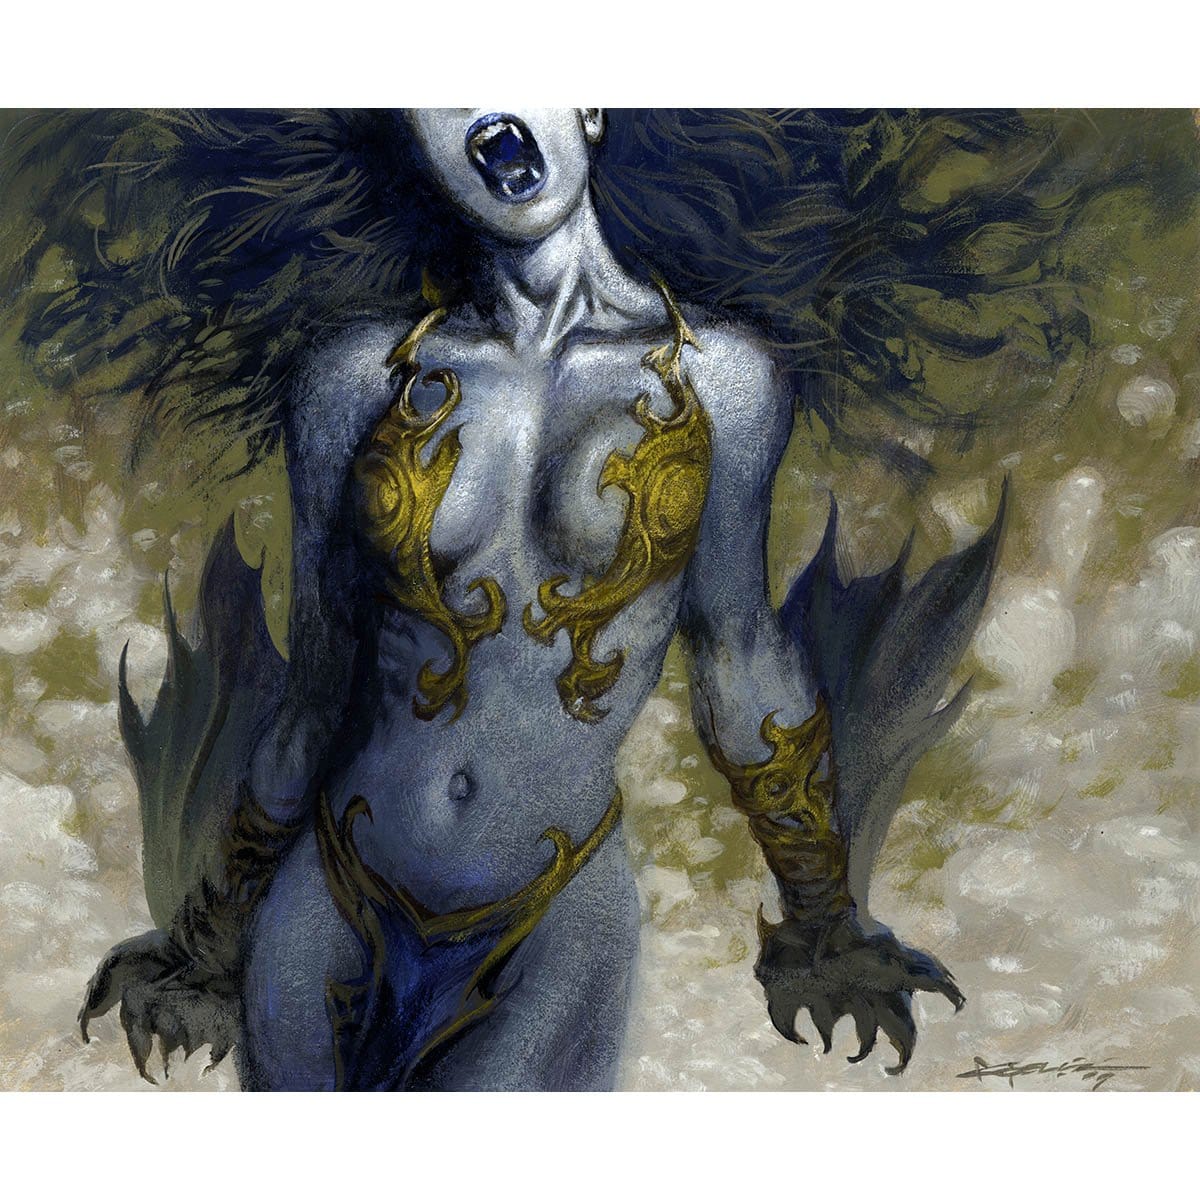 Vampire's Bite Print - Print - Original Magic Art - Accessories for Magic the Gathering and other card games